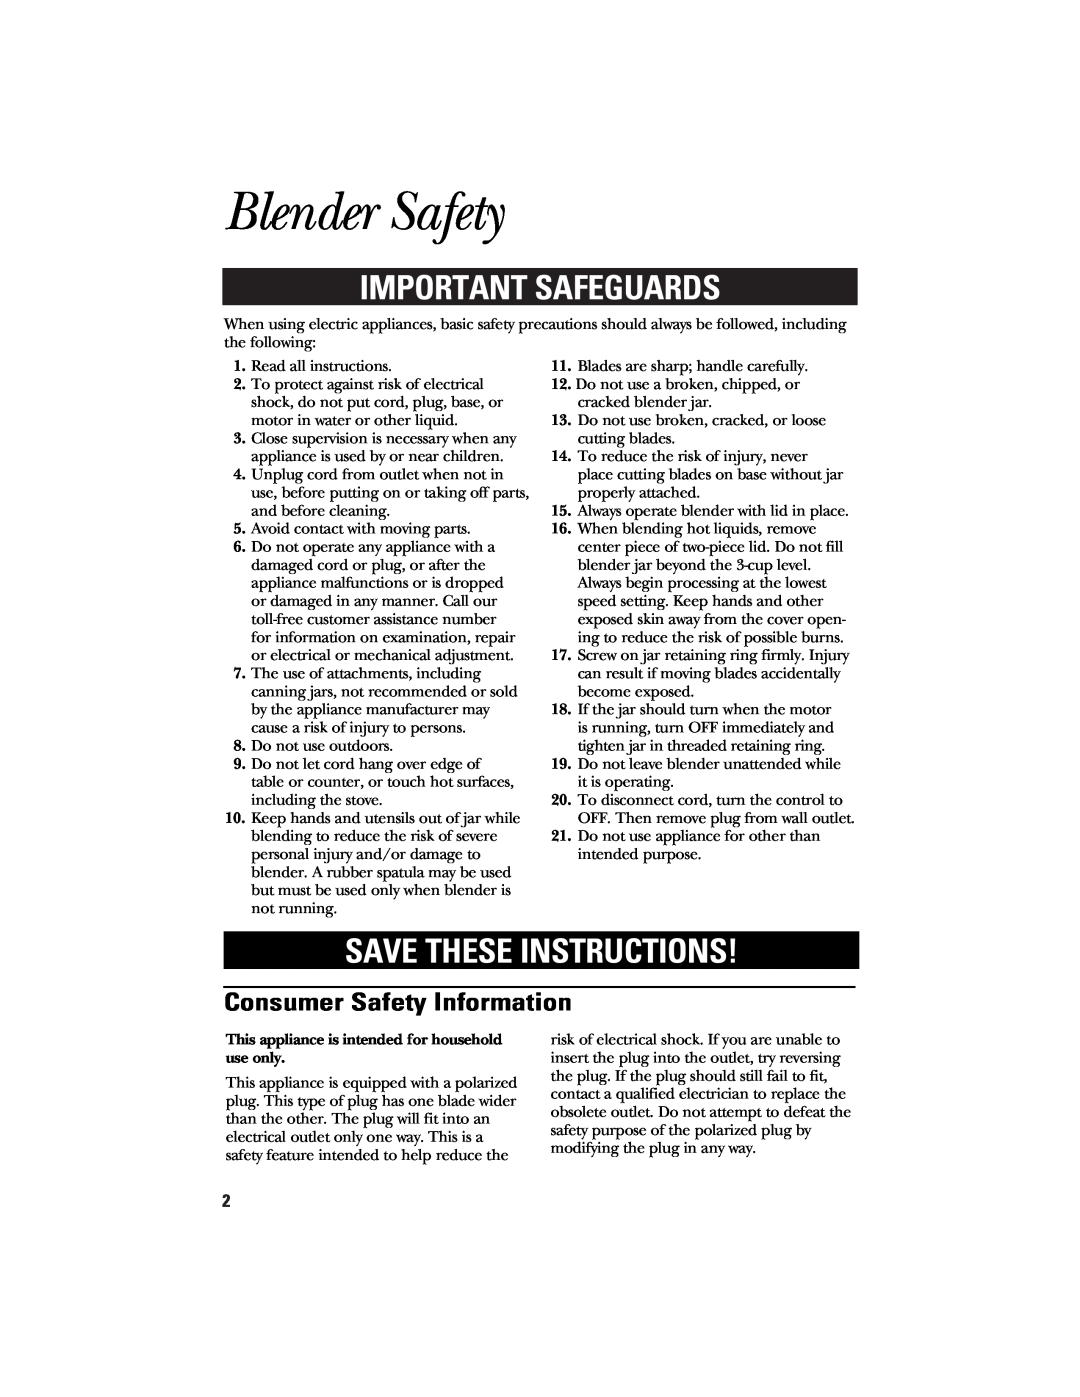 GE 840079000, 106601 manual Blender Safety, Important Safeguards, Save These Instructions, Consumer Safety Information 